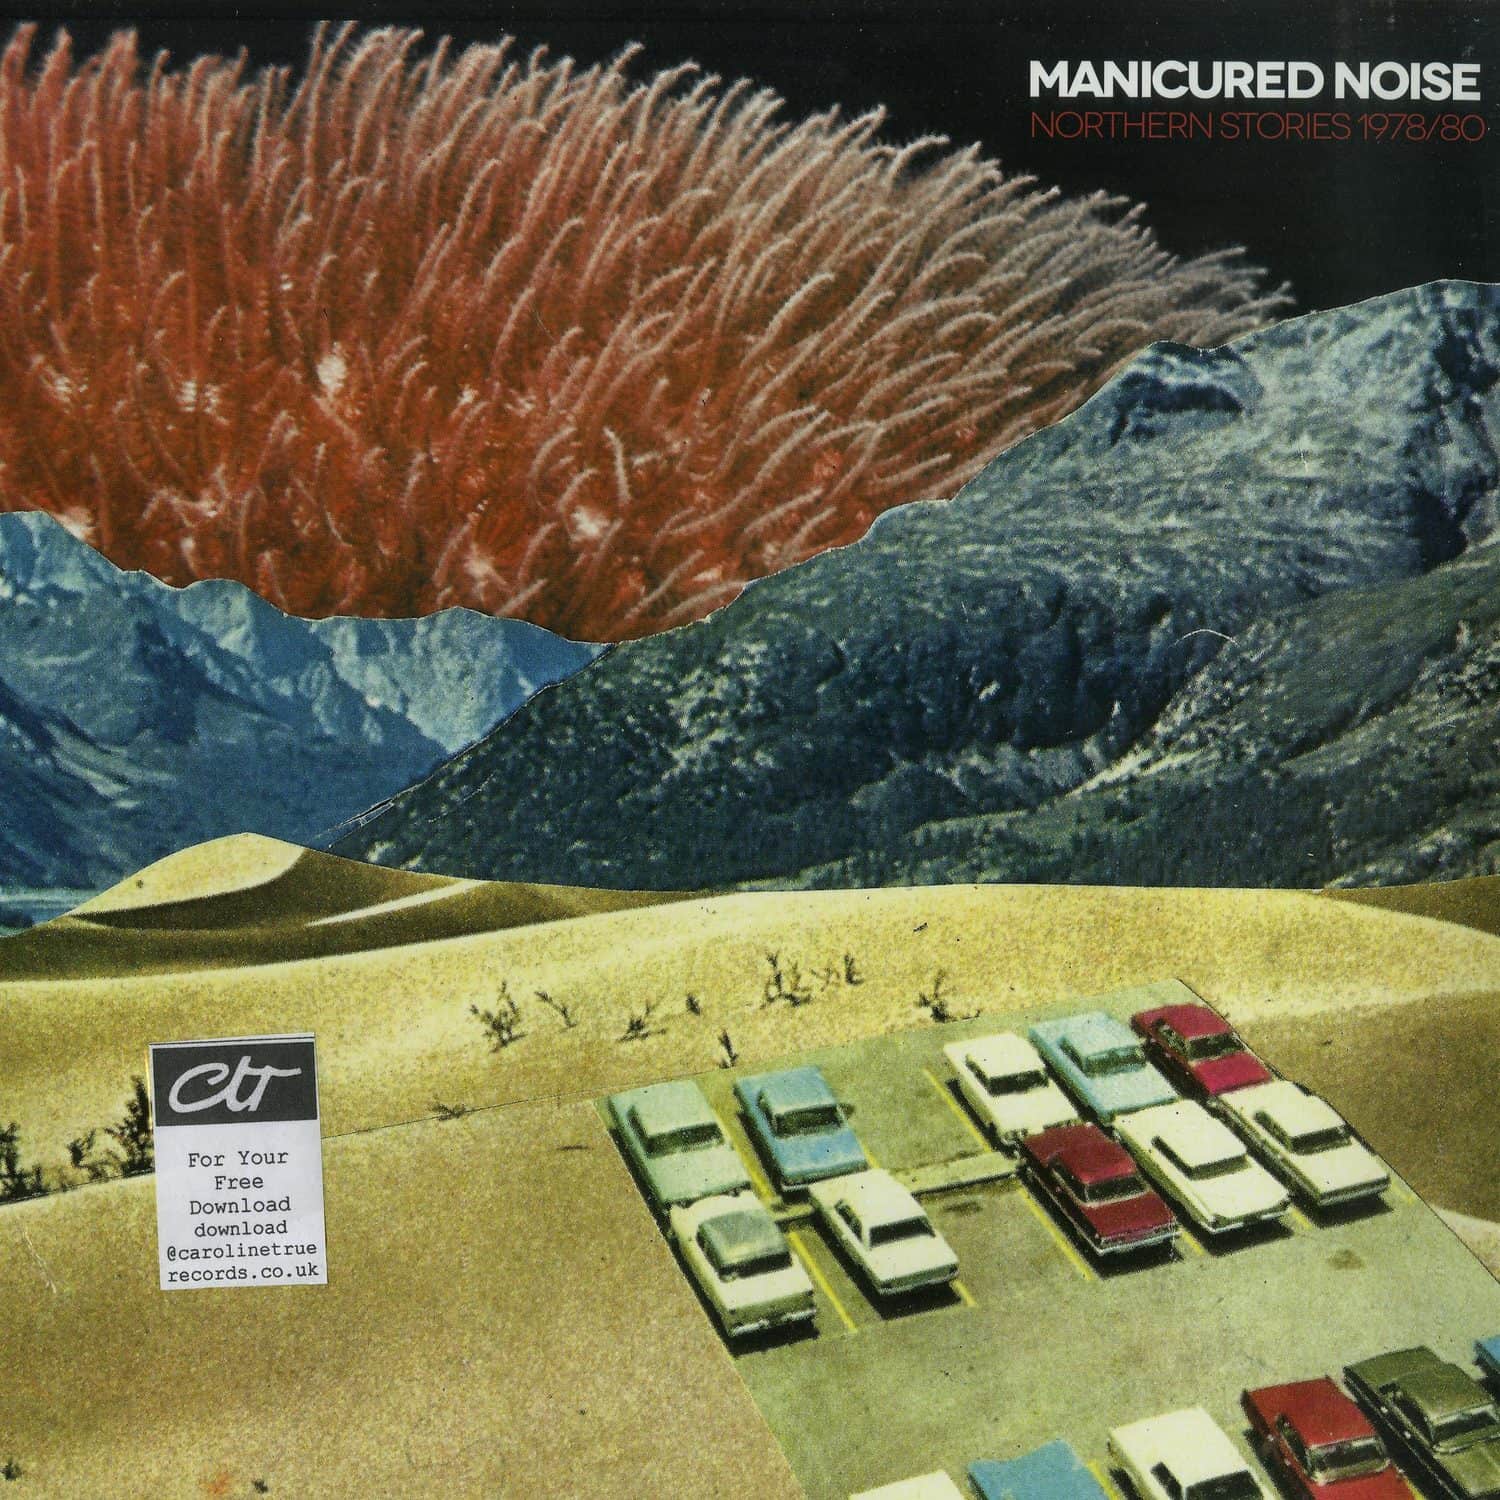 Manicured Noise - NORTHERN STORIES 1978 / 80 